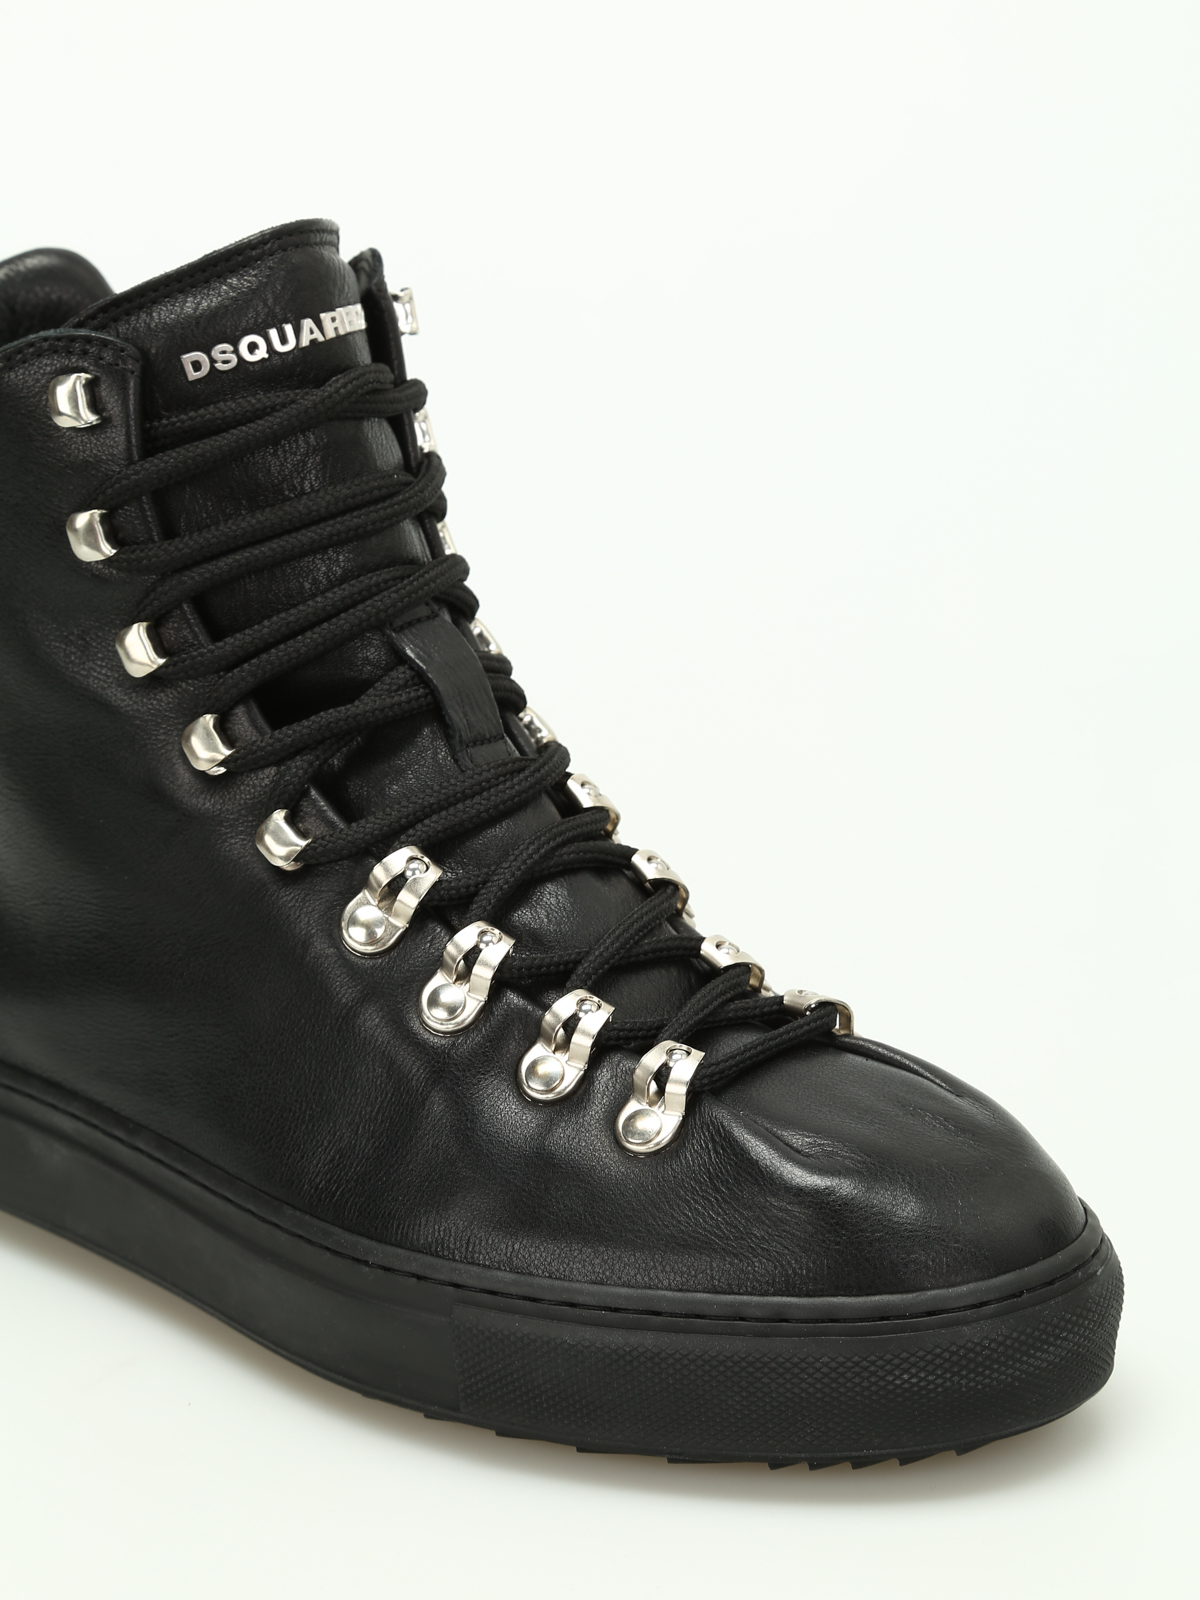 Dsquared2 - Whistler leather high-top 